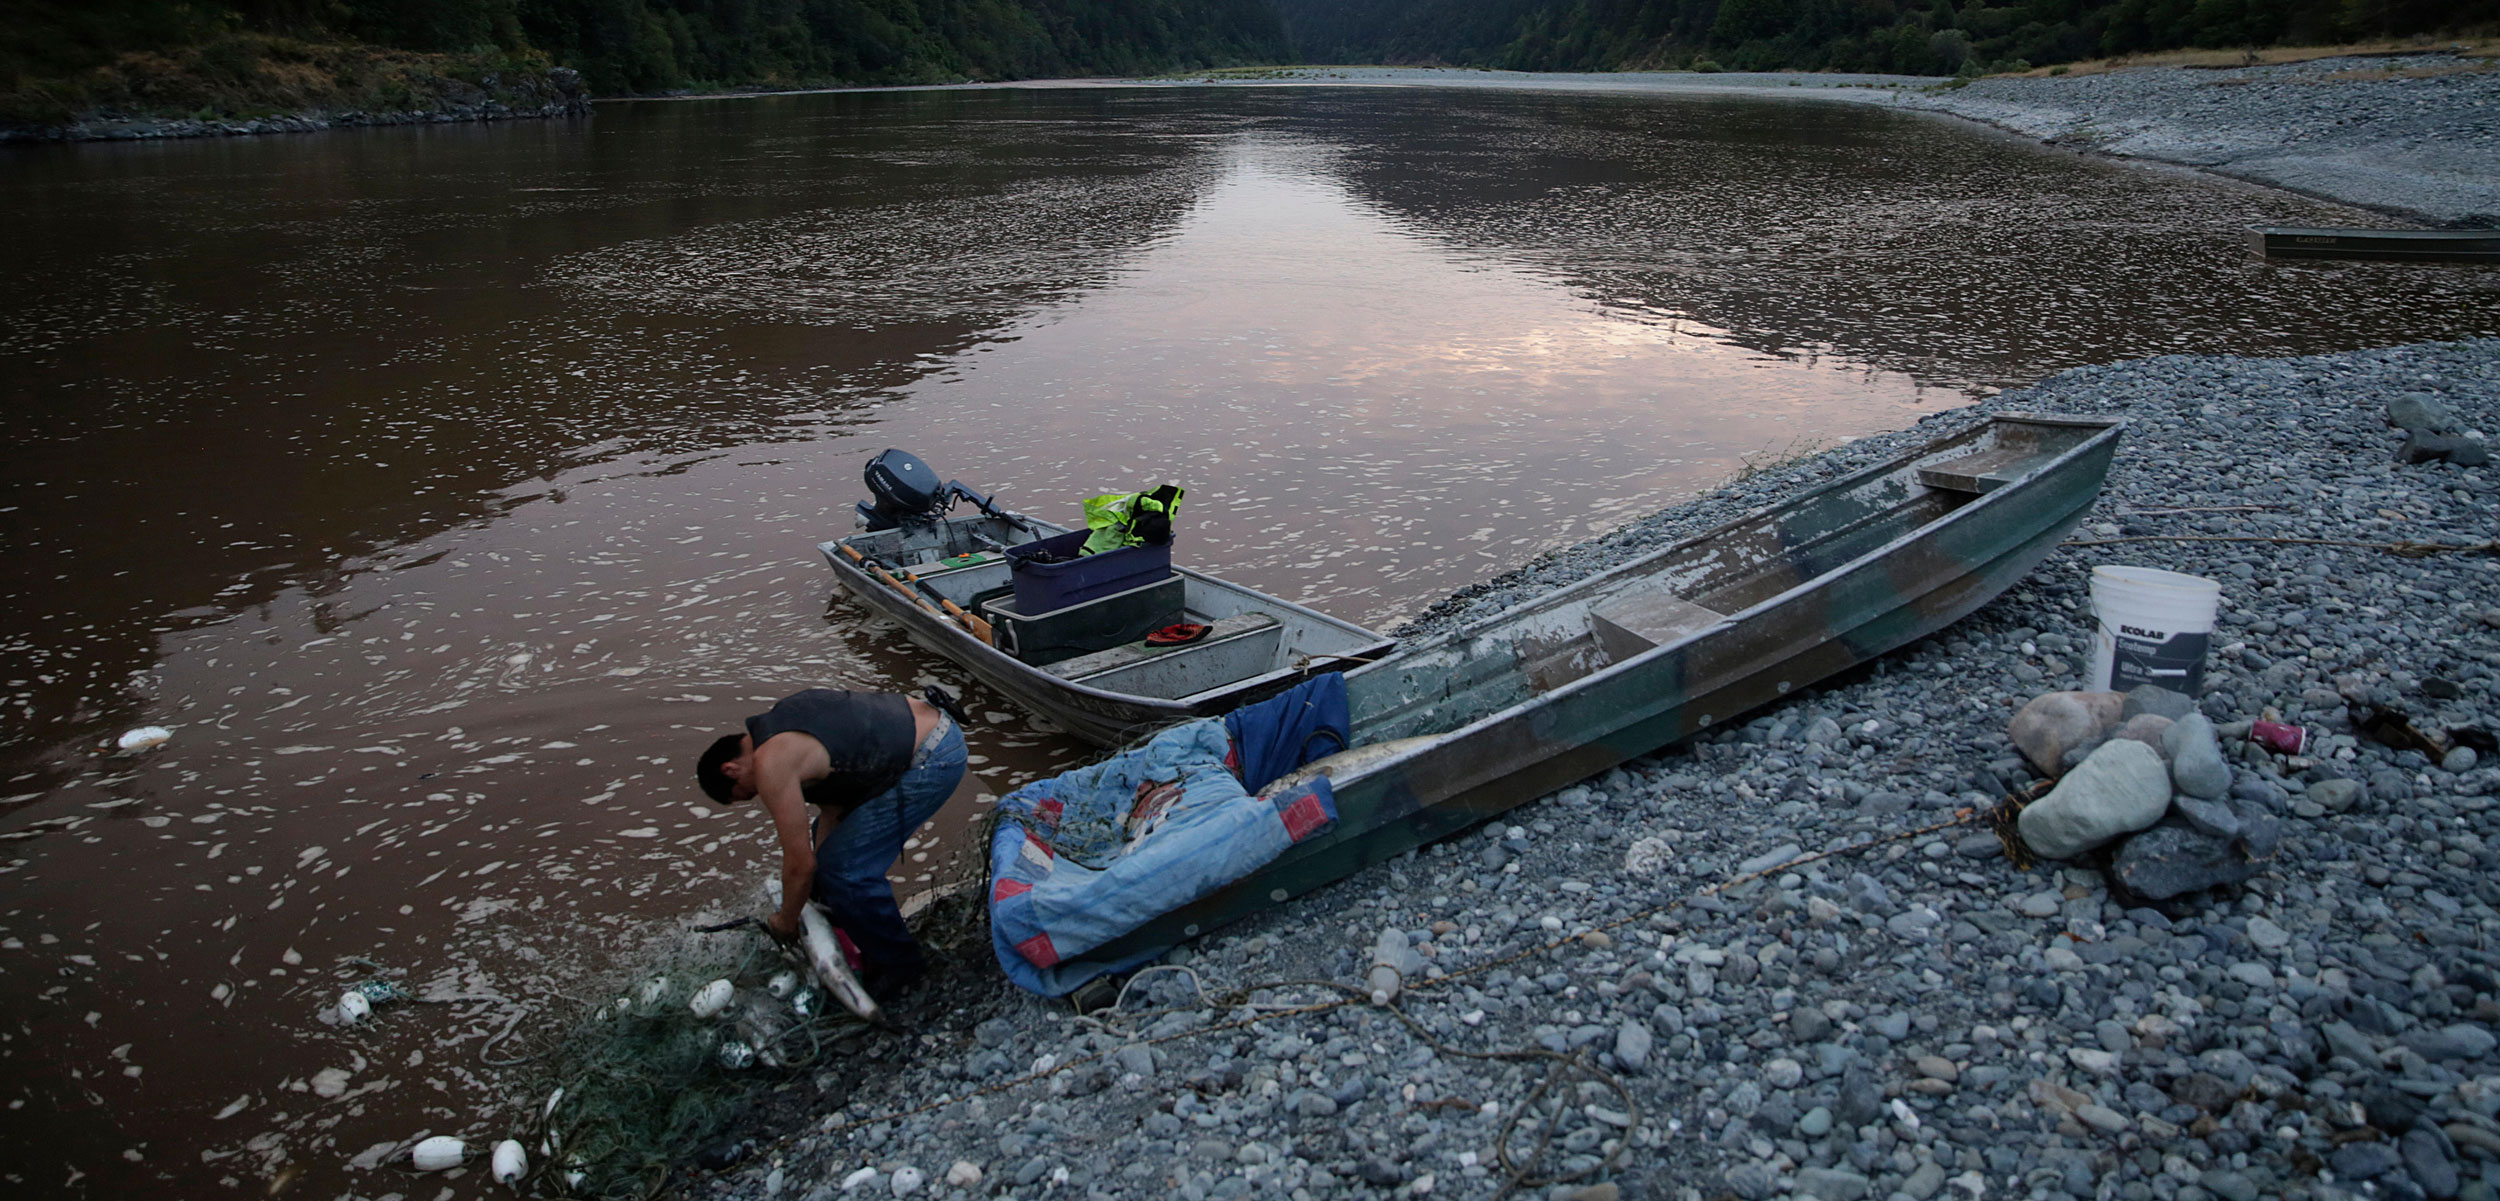 a member of the Yurok Indian Tribe, pulls salmon from his gill net on the Klamath River